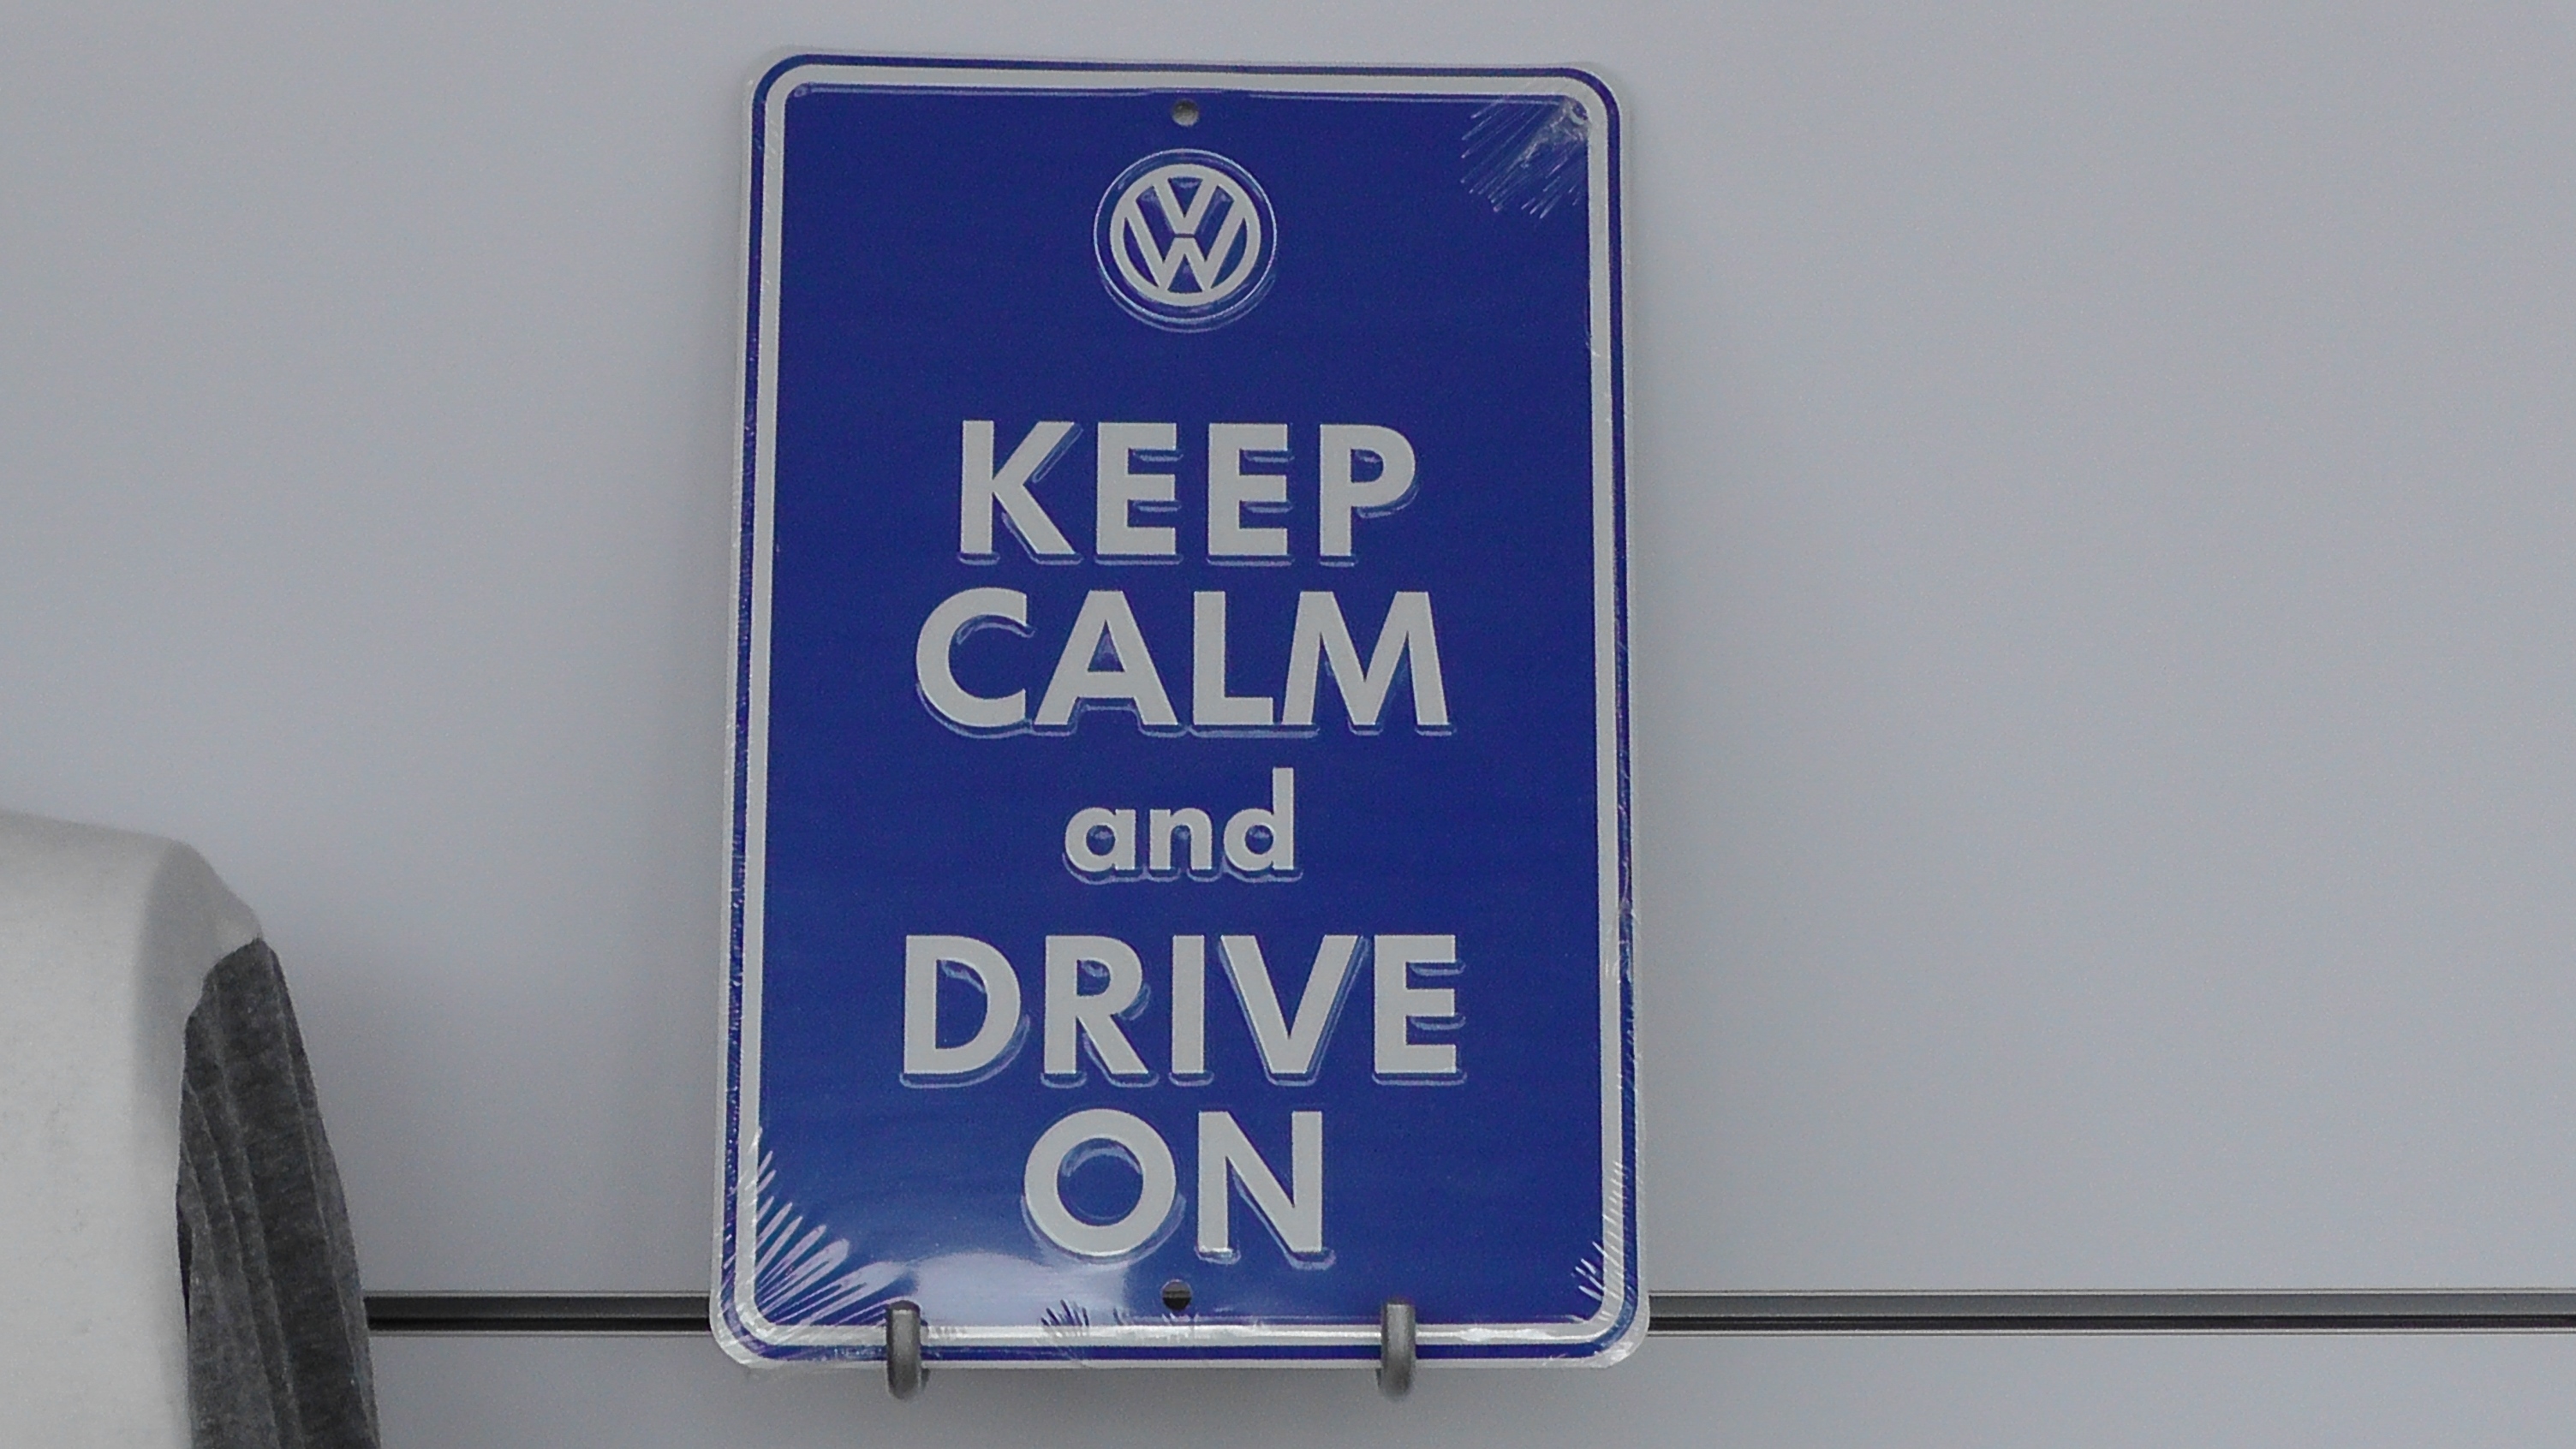 Our thoughts exactly. Nothing says Volkswagen like this sign. Keep calm and drive on V-Dub lovers!